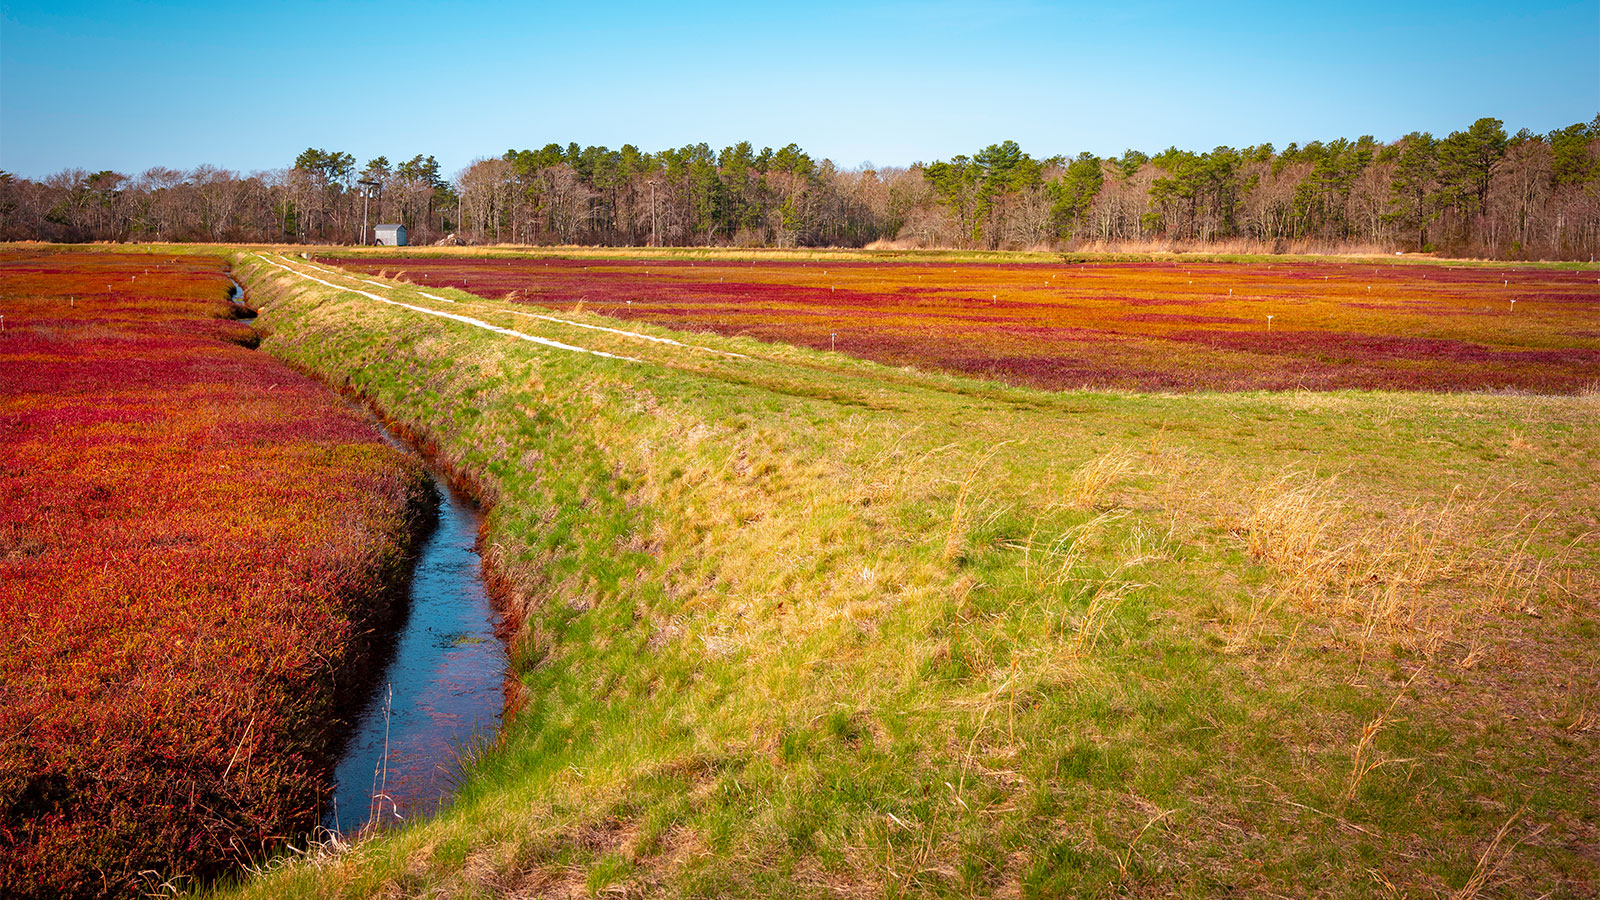 Cranberry bogs with irrigation channel in between